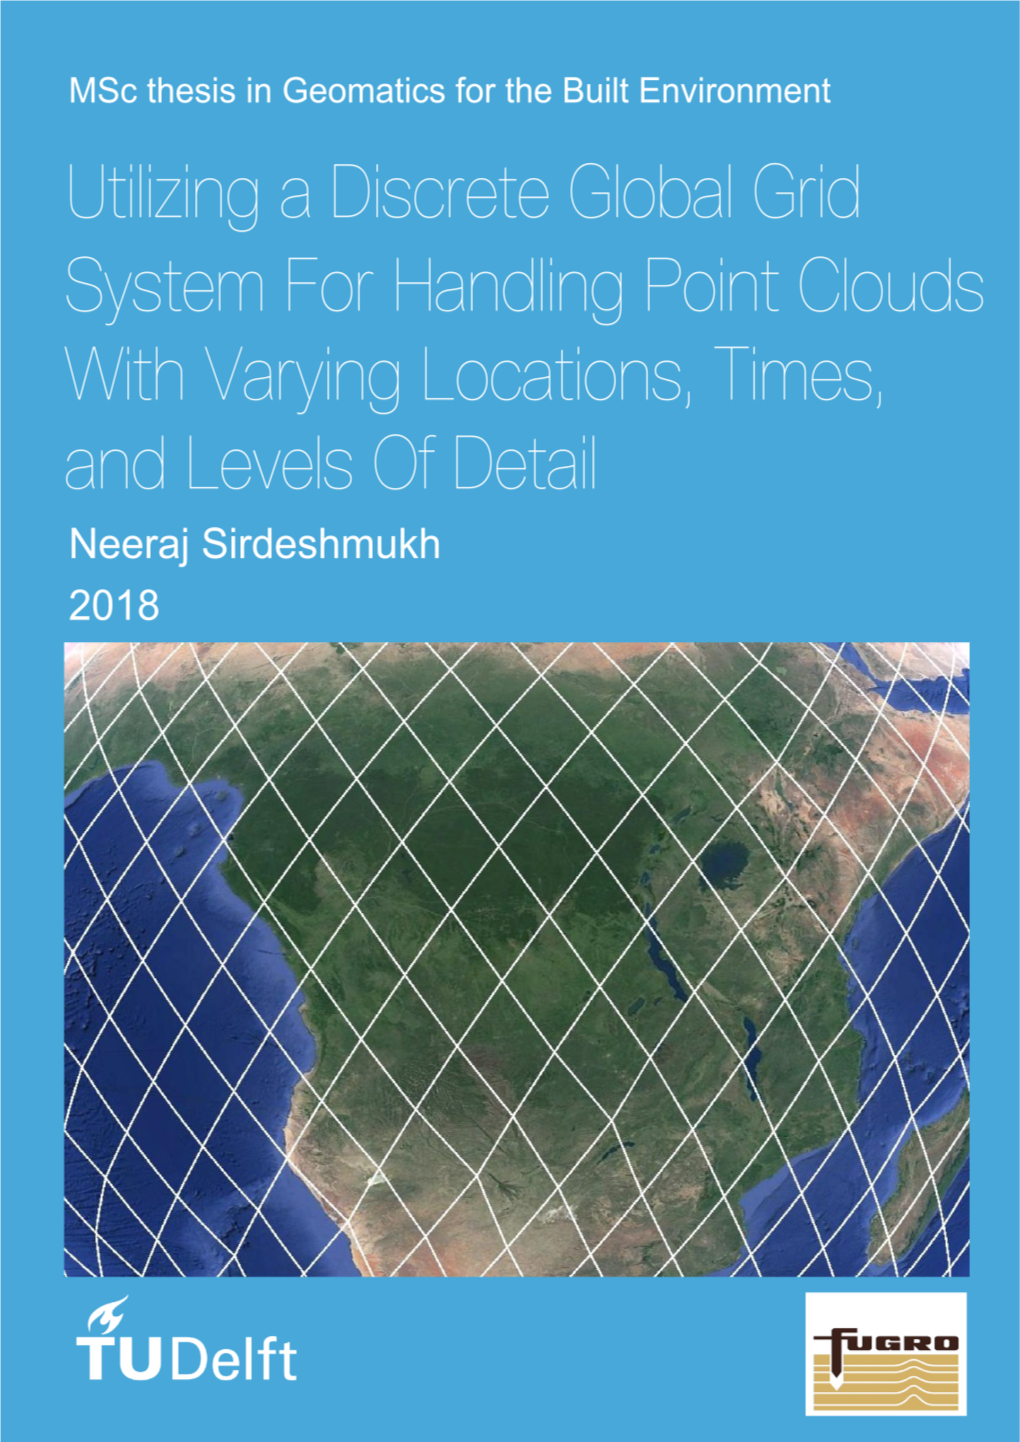 Utilizing a Discrete Global Grid System for Handling Point Clouds